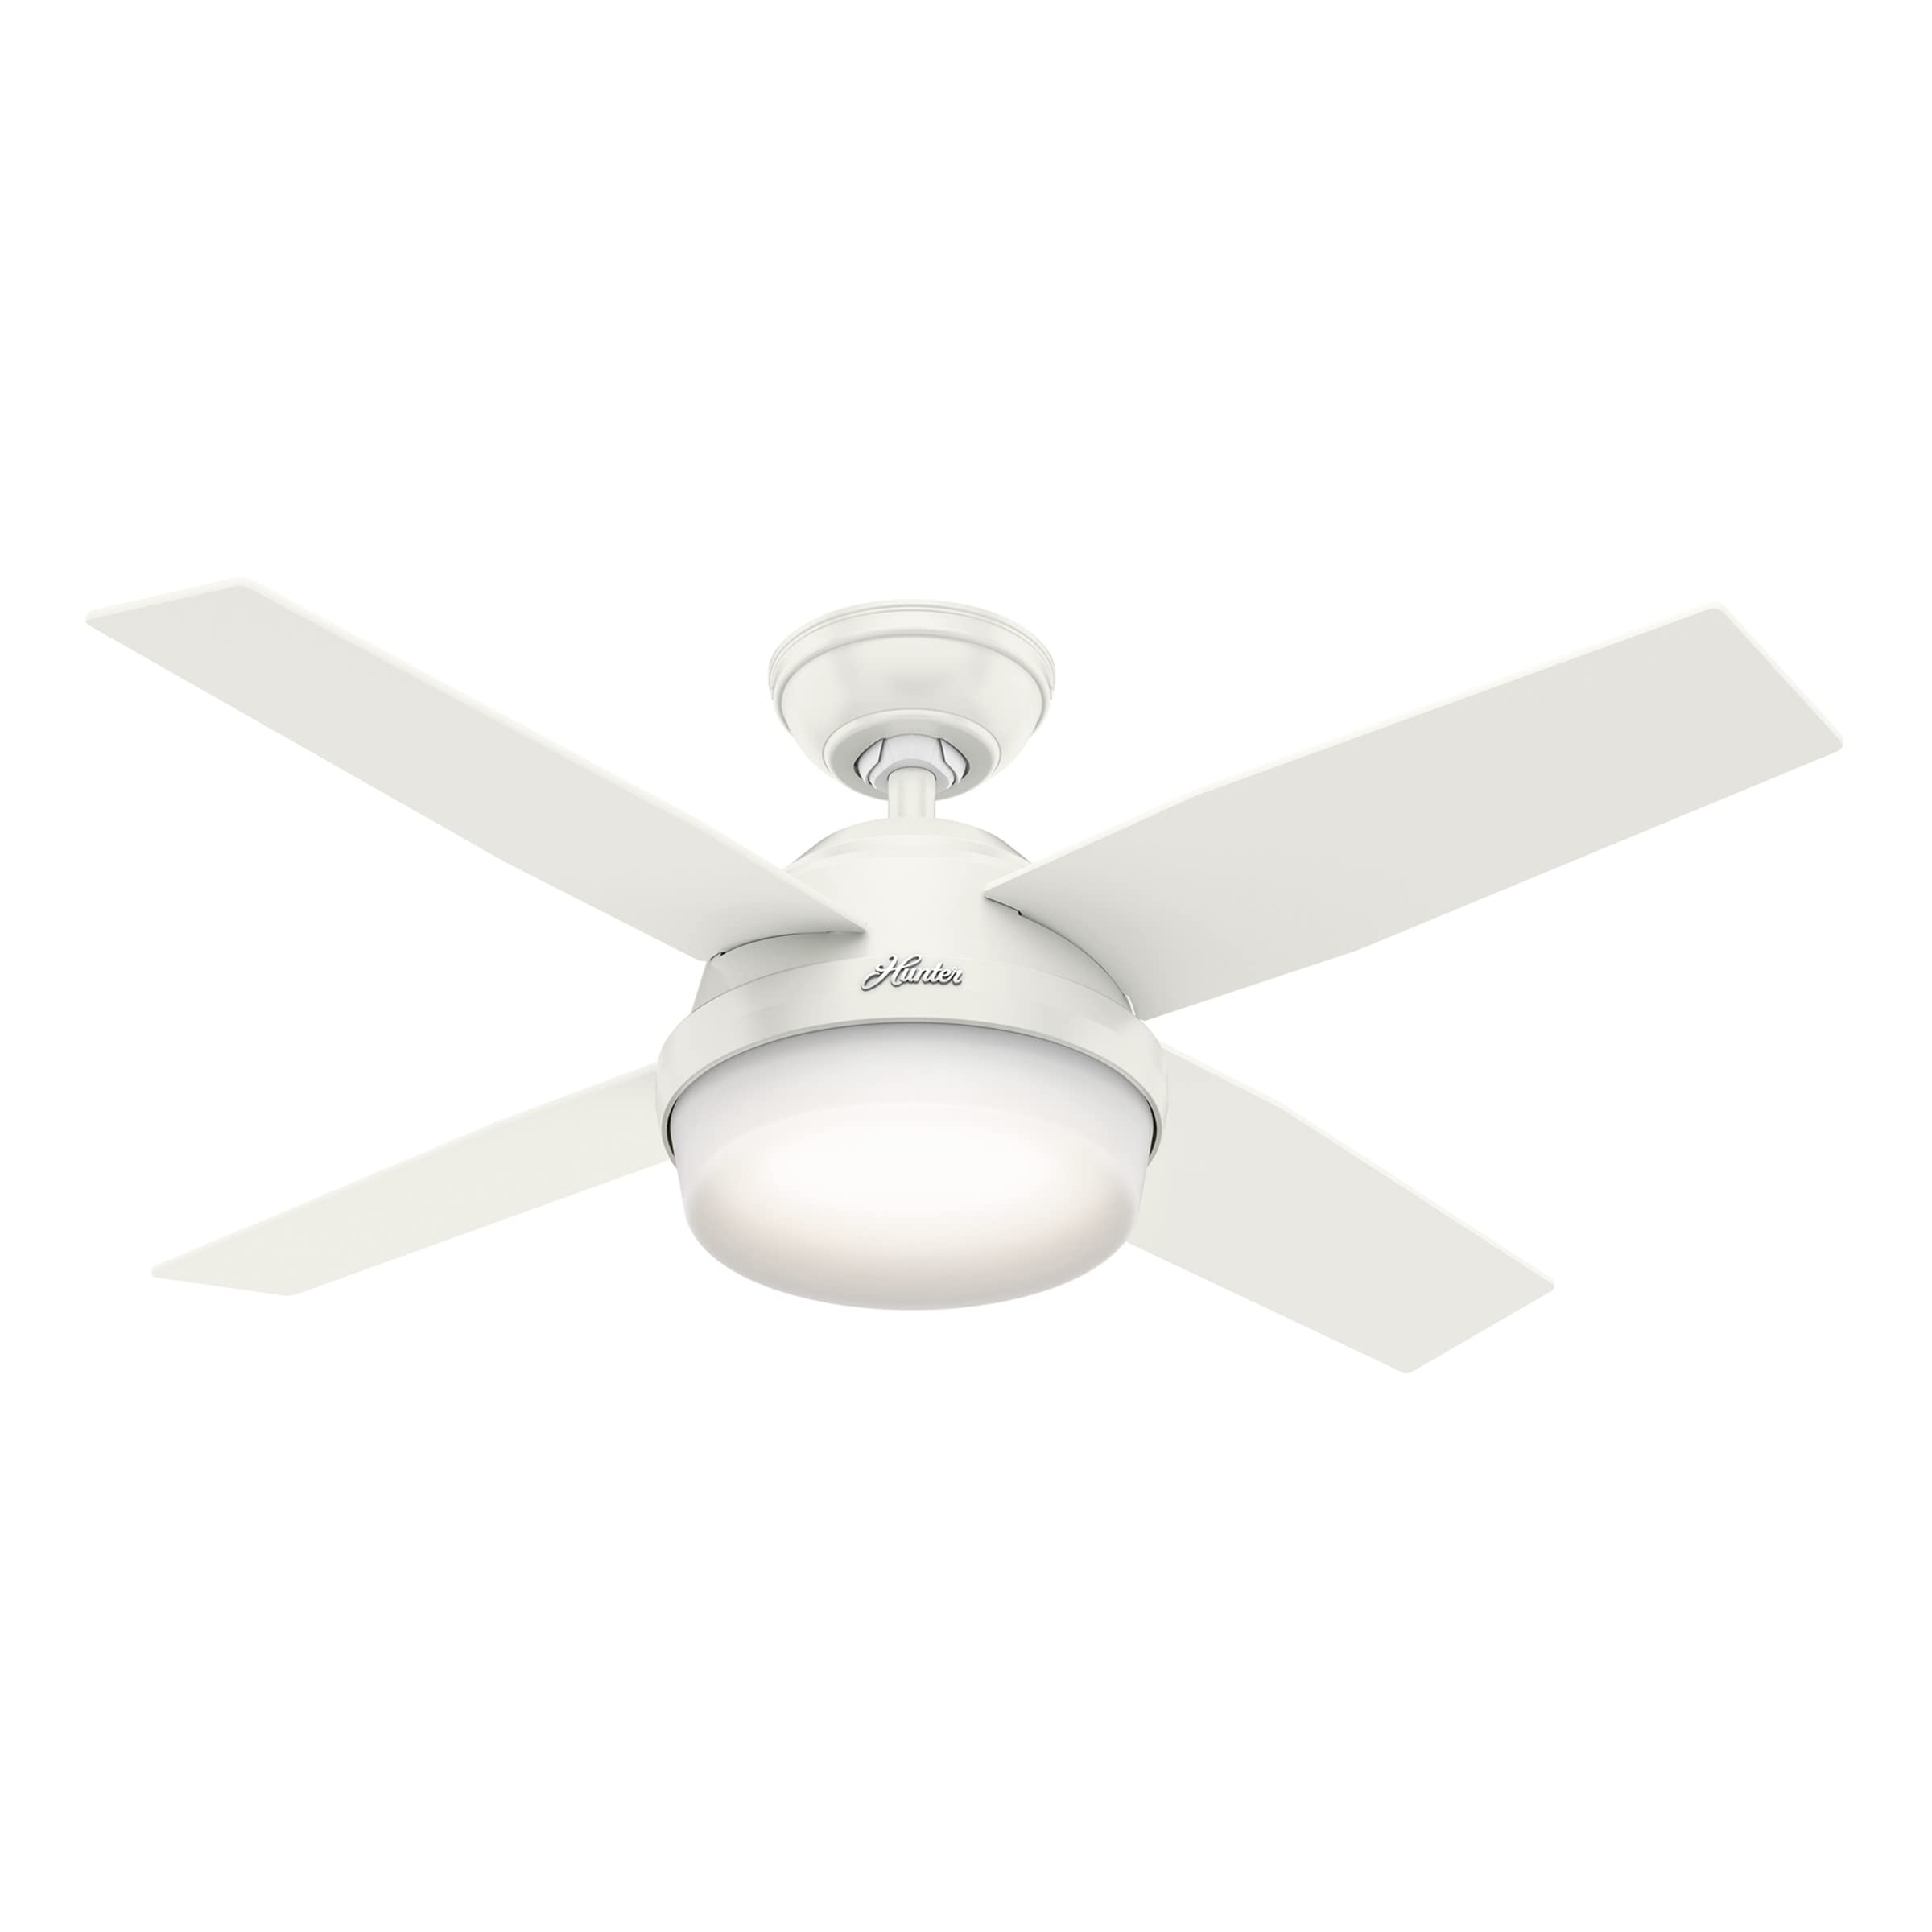 Hunter Dempsey Indoor Ceiling Fan with LED Light and Remote Control, 44", White Fresh White finish